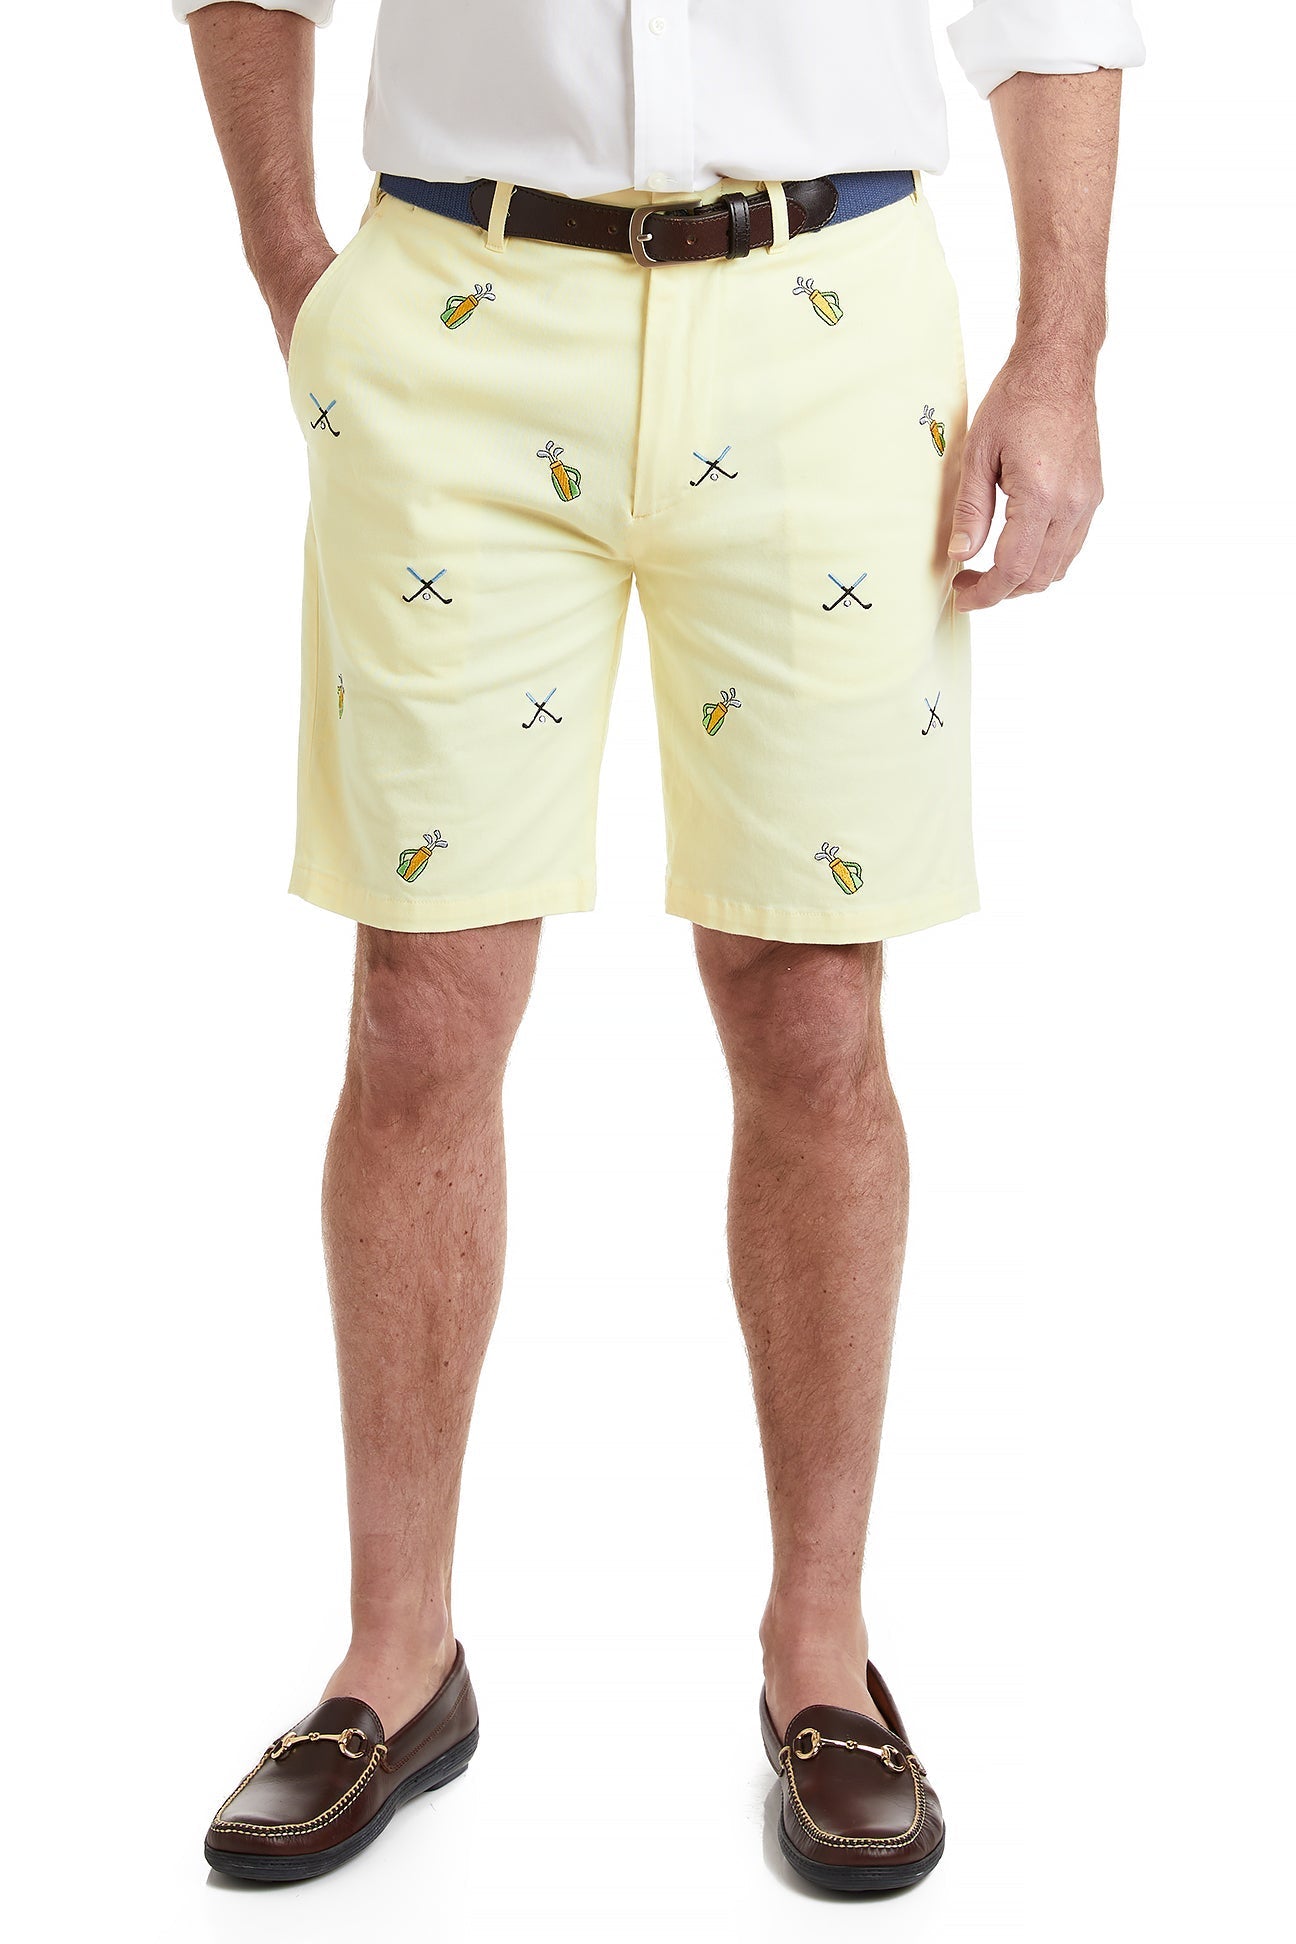 Cisco Short Neon Yellow with Golf Bags & Crossed Clubs MENS EMBROIDERED SHORTS Castaway Nantucket Island